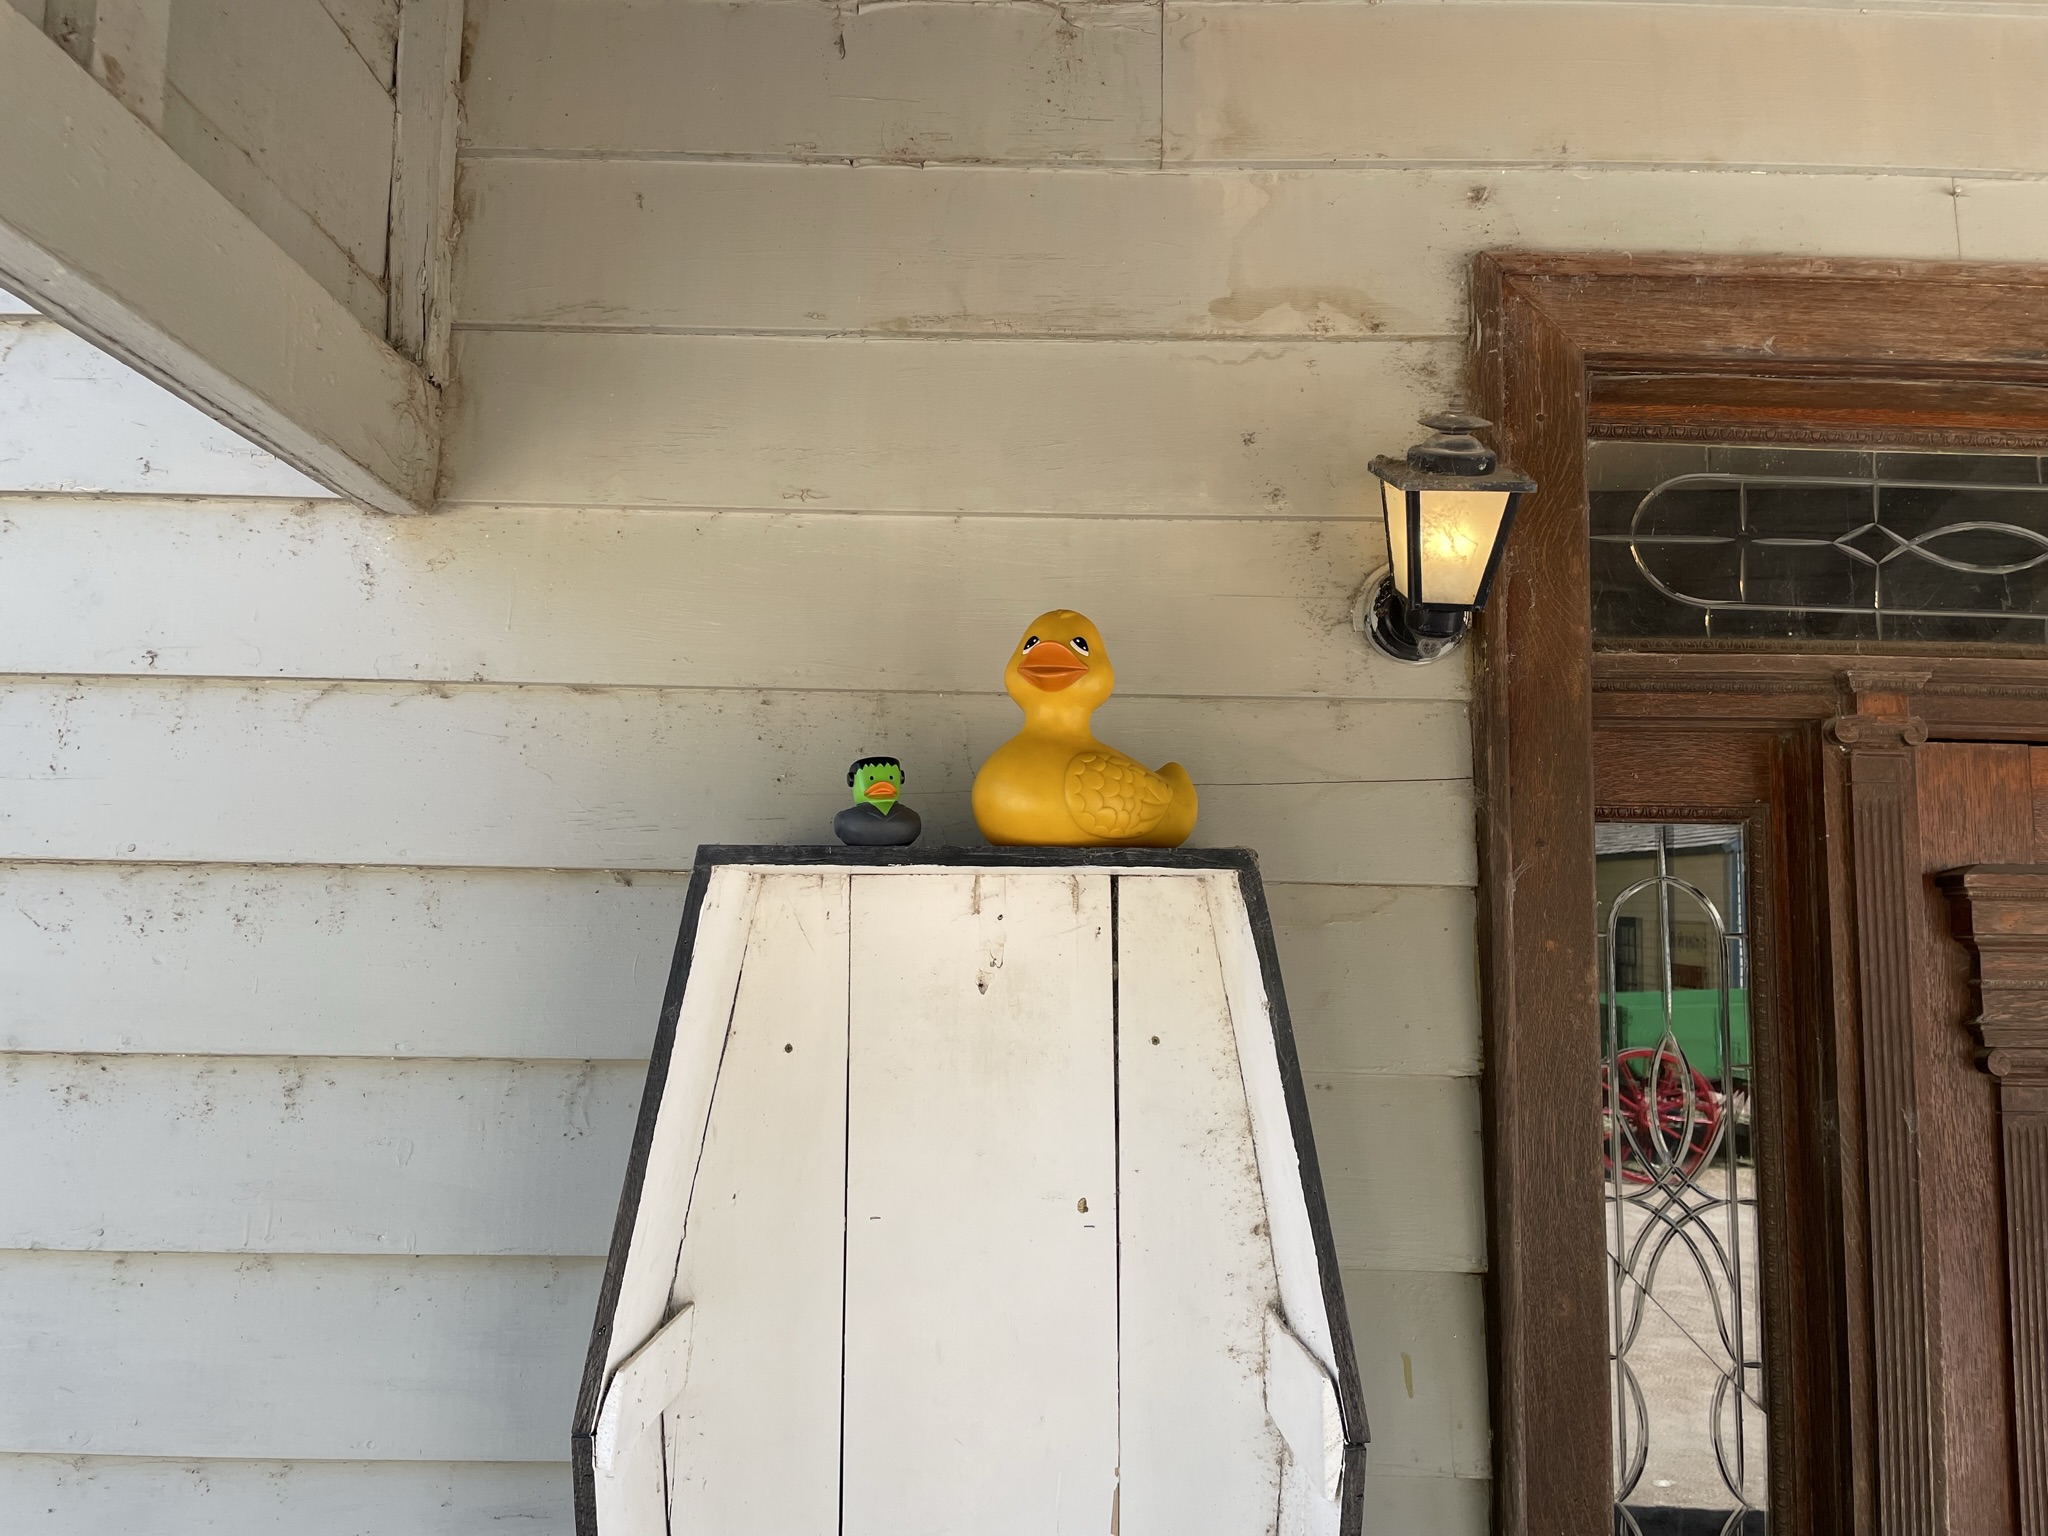 The Ducking Images, Fall 2022 Edition 23